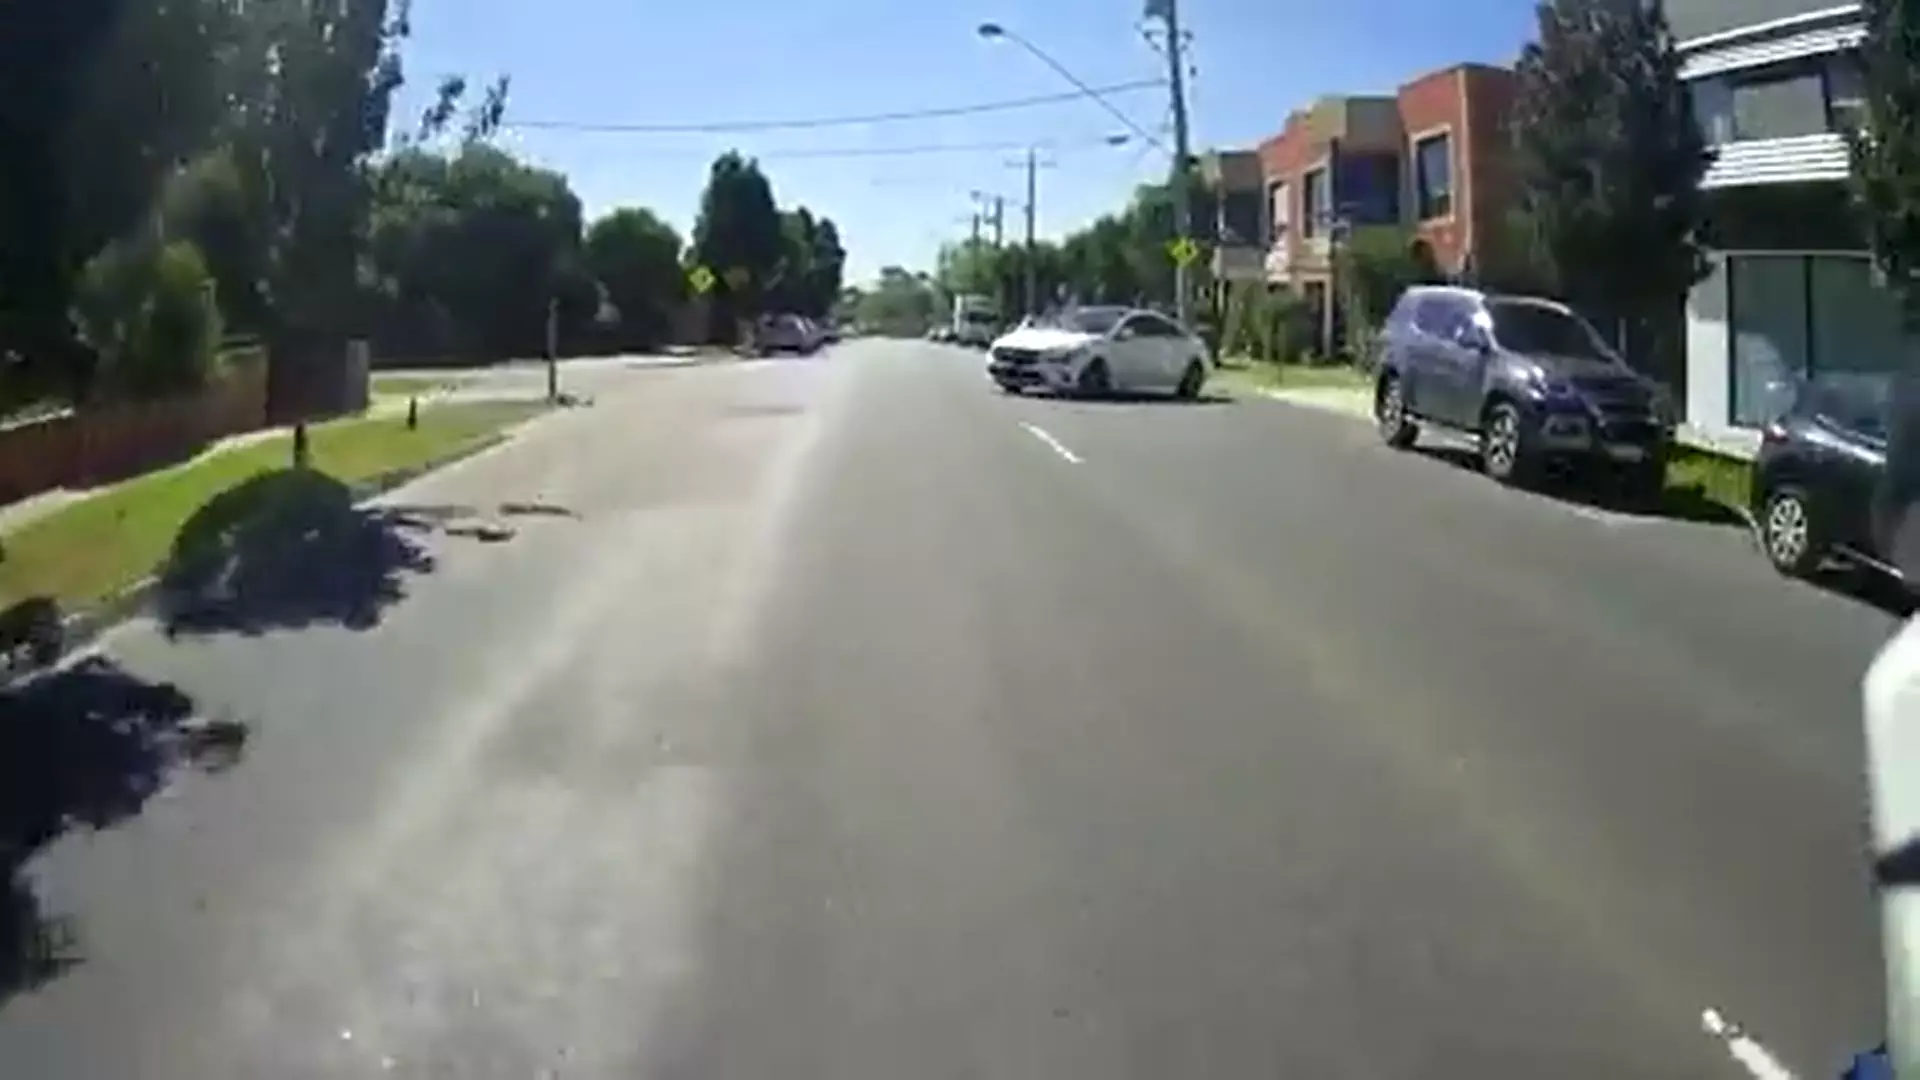 The biker braked but couldn't avoid the crash.